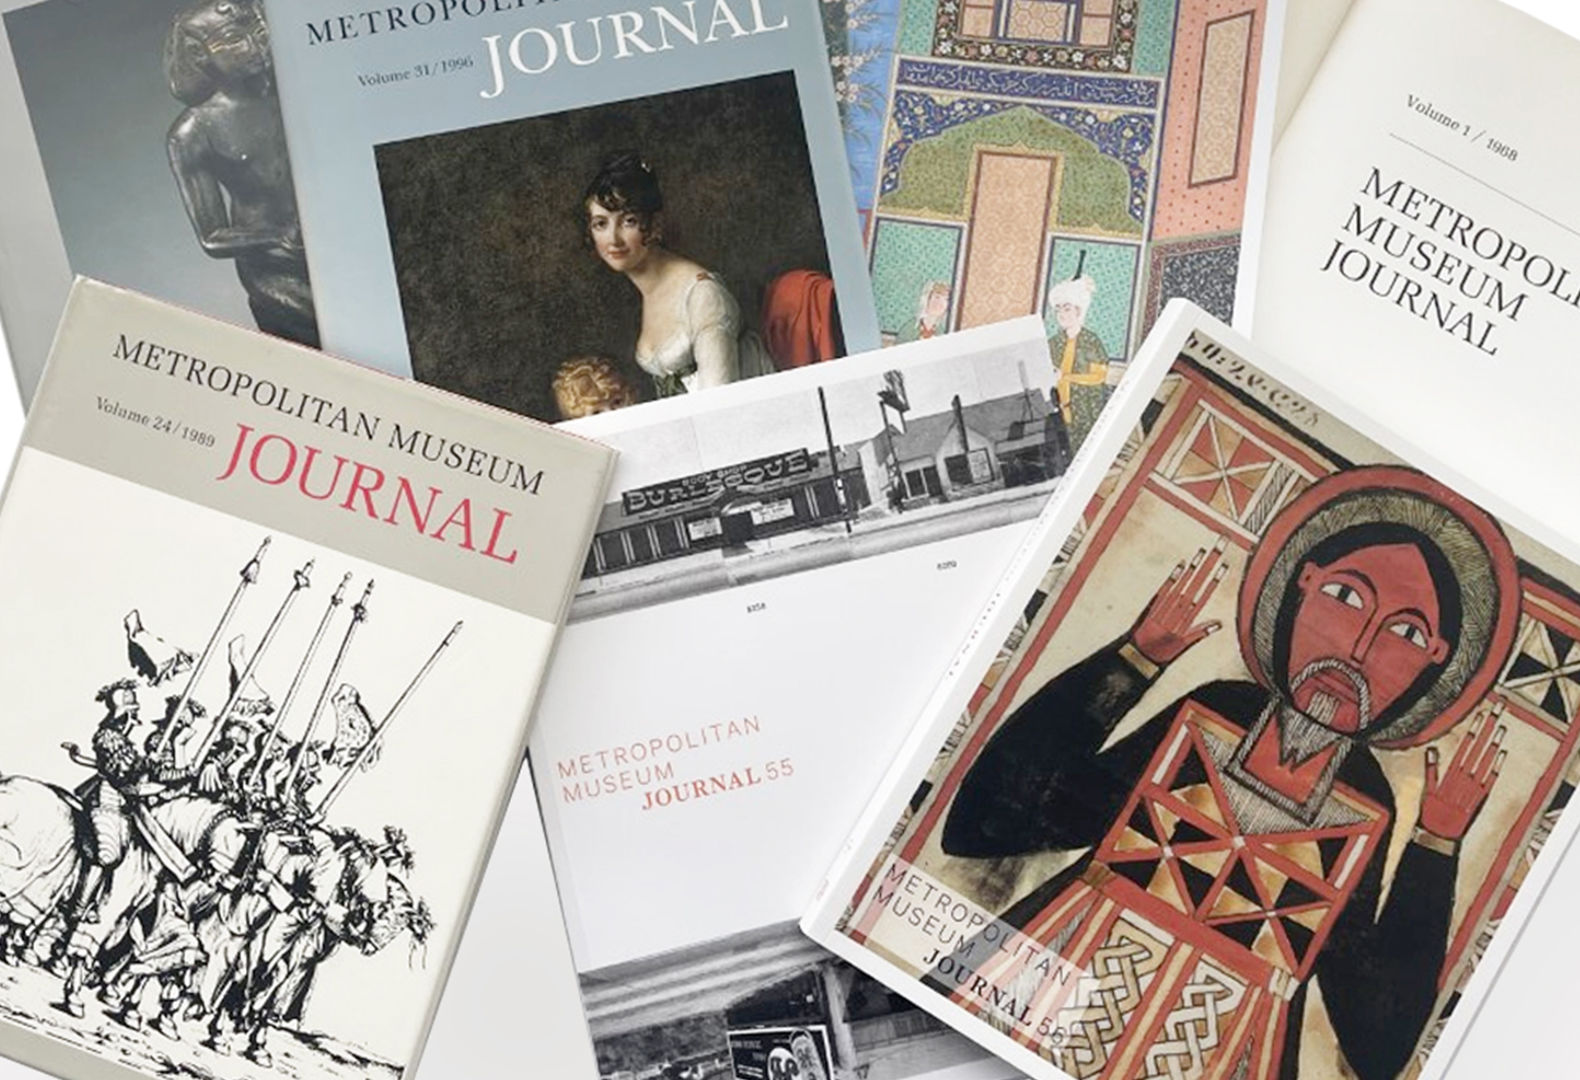 Collage of the Metropolitan Museum Journal's covers